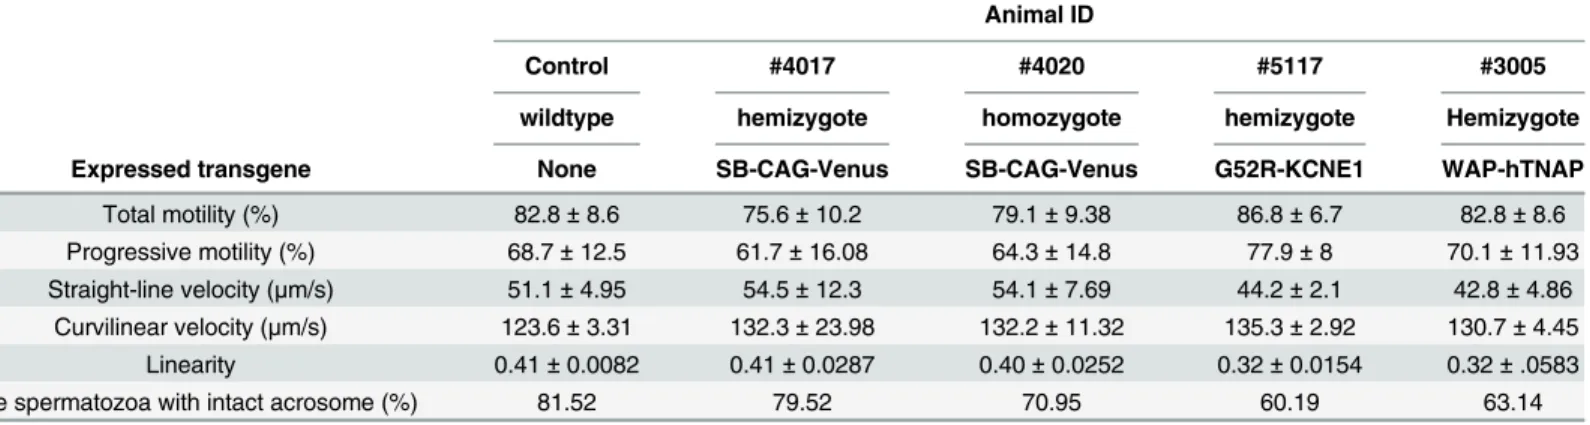 Table 2. Comparative analysis of semen parameters from transgenic and control bucks (CASA) Data represent the mean ± S.D., #4017, #4020 are the SB-CAG-Venus transgenic bucks; #5117, #3005 are transgenic bucks [27,28]